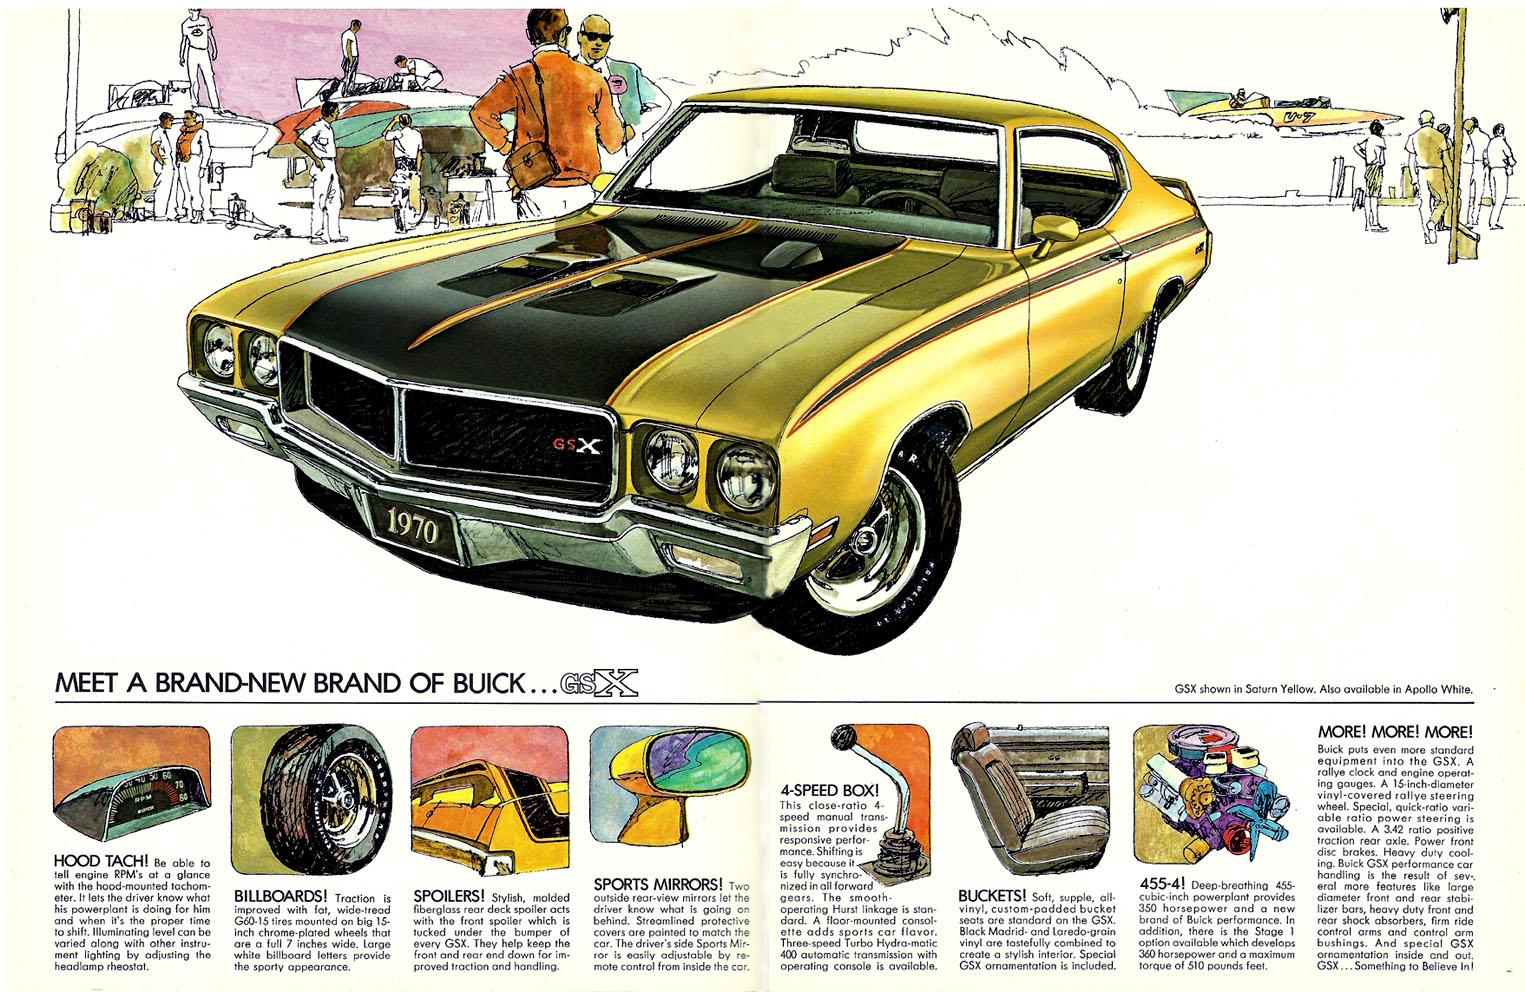 1970s Buick Logo - Musclecars You Should Know: 1970 Buick GSX GSX Stage 1